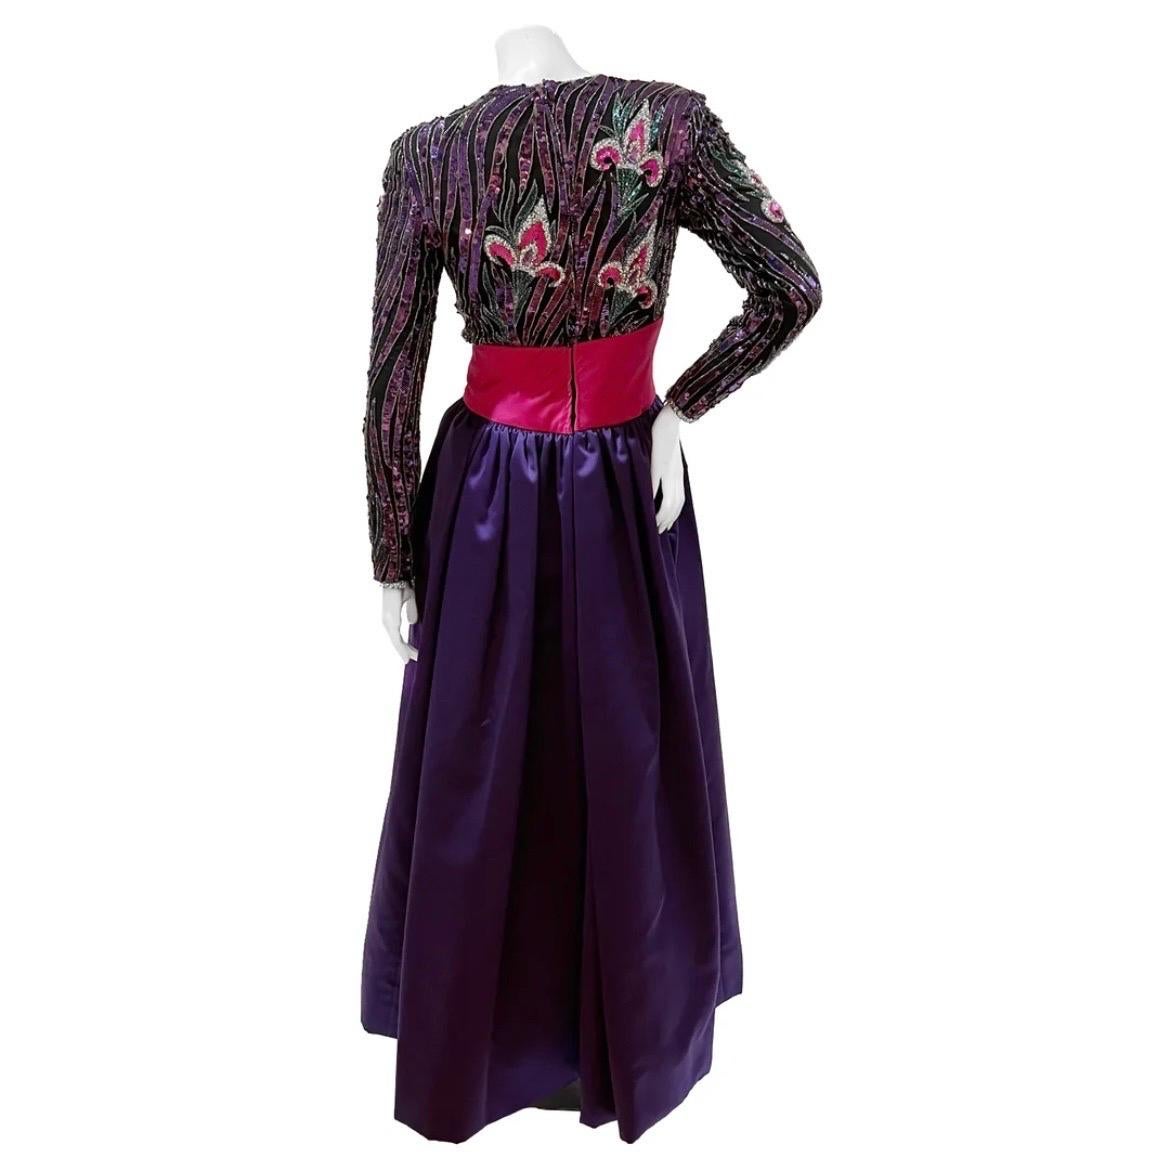 Vintage Purple Sequin Mardi Gras Gown by Bob Mackie Boutique
Circa 1980s
Purple/pink
Long sleeve
Purple and pink floral beaded and sequin embellishment
Front pink bow and waist detail
High neckline 
Zip cuff closure
Back zip closure
Skirt lining